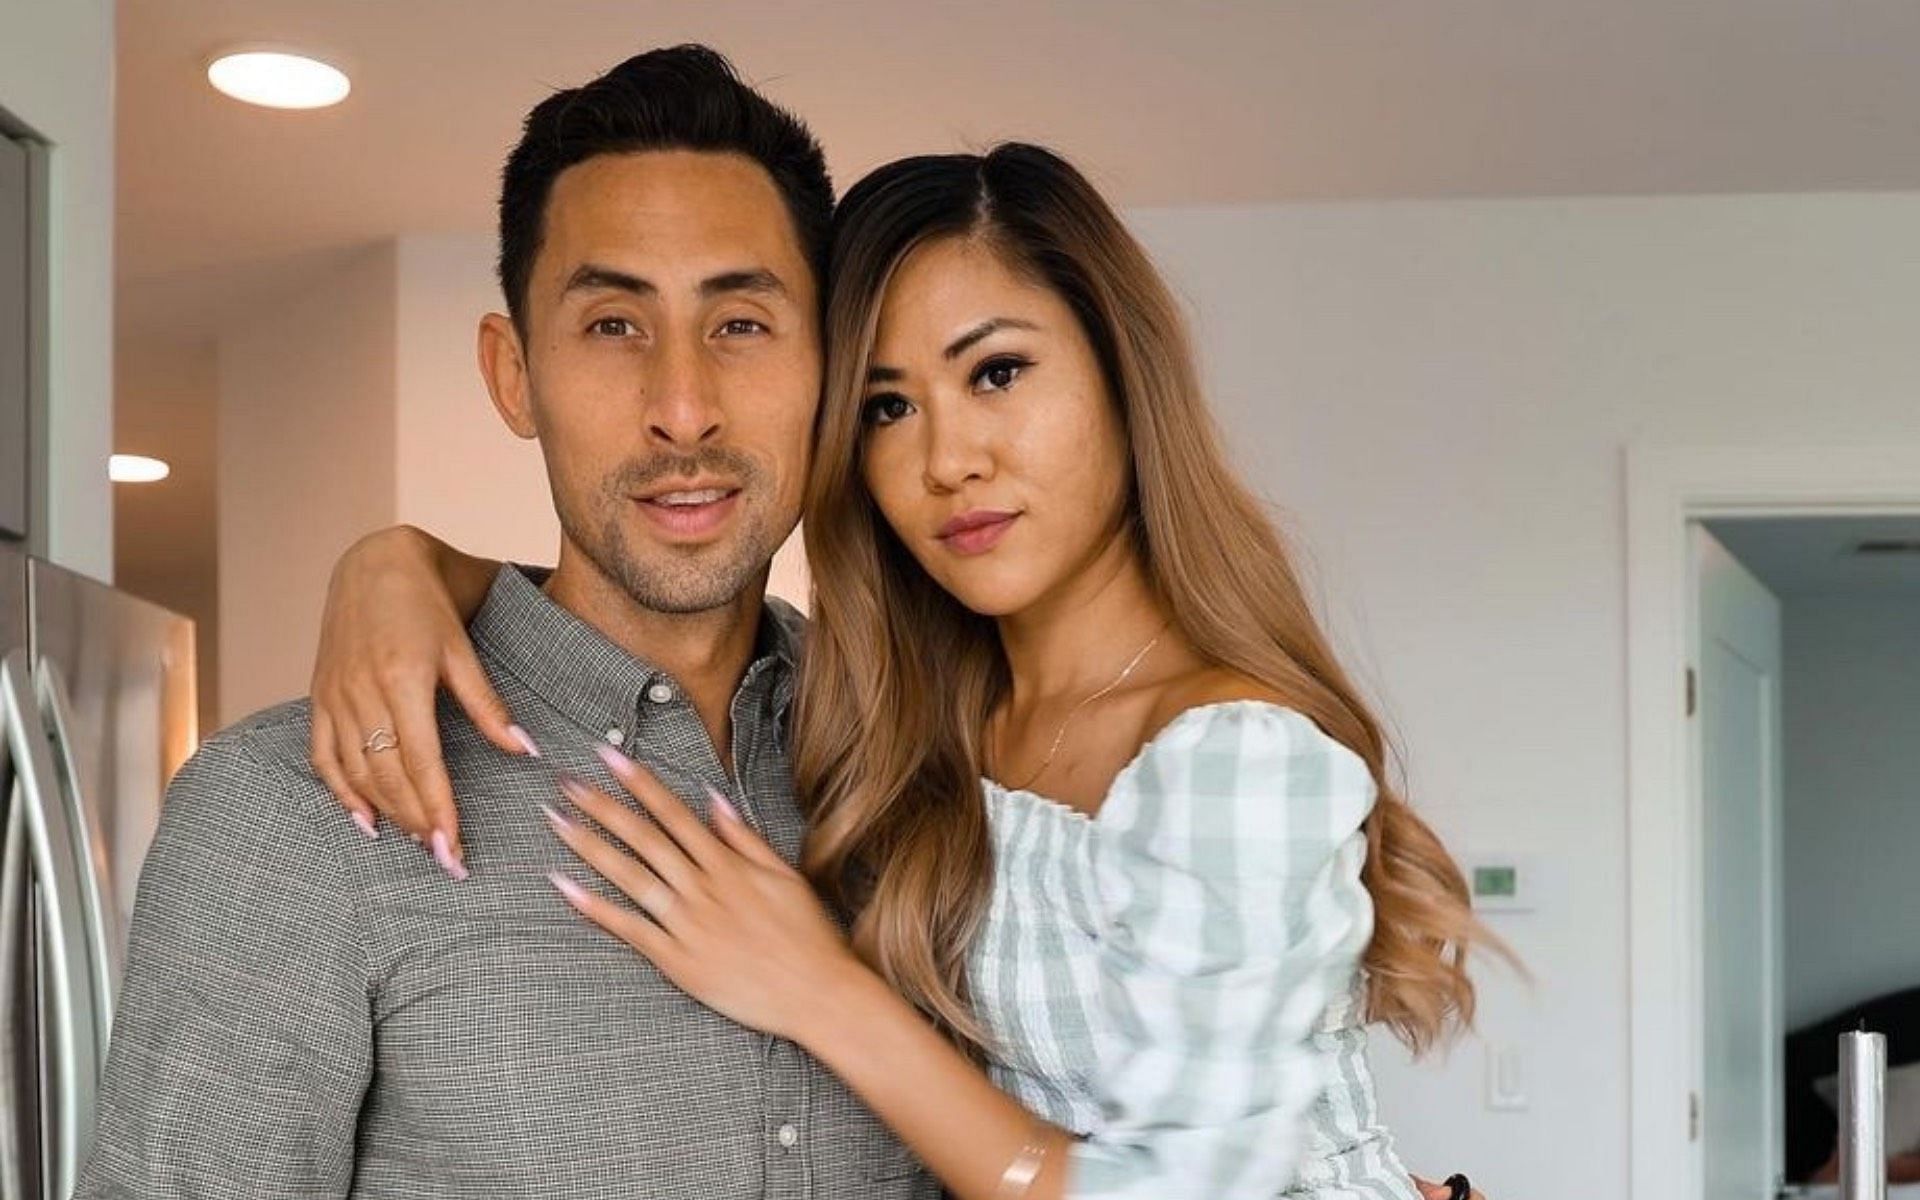 “Divorce feels good” Married at First Sight couple Steve Moy and Noi